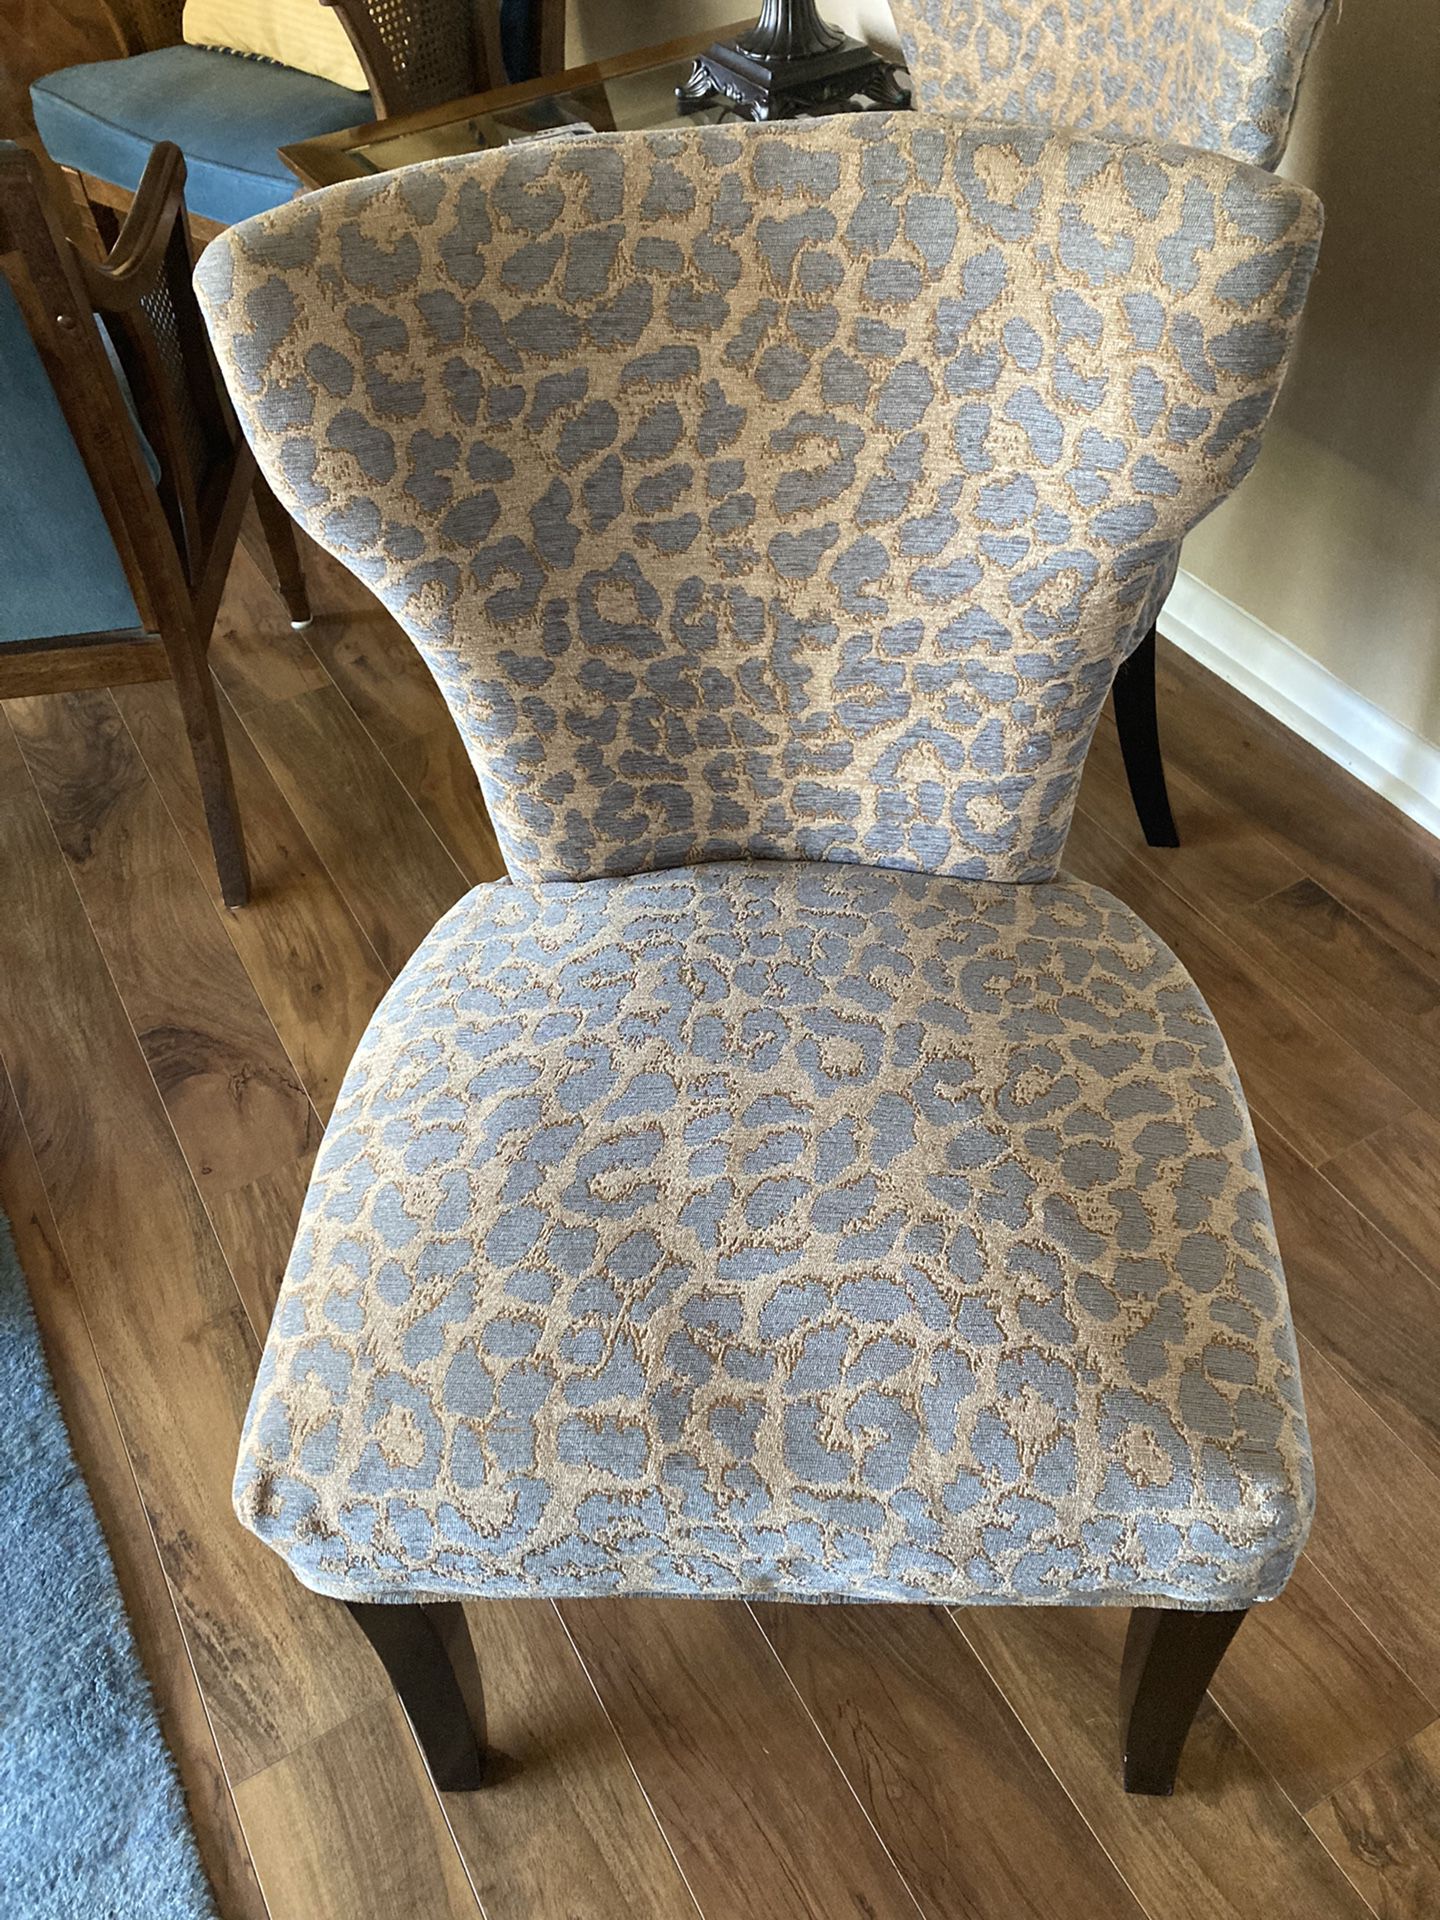   2   Accent Chairs  Very Pretty  !  MOVING MUST  SELL  ASAP!